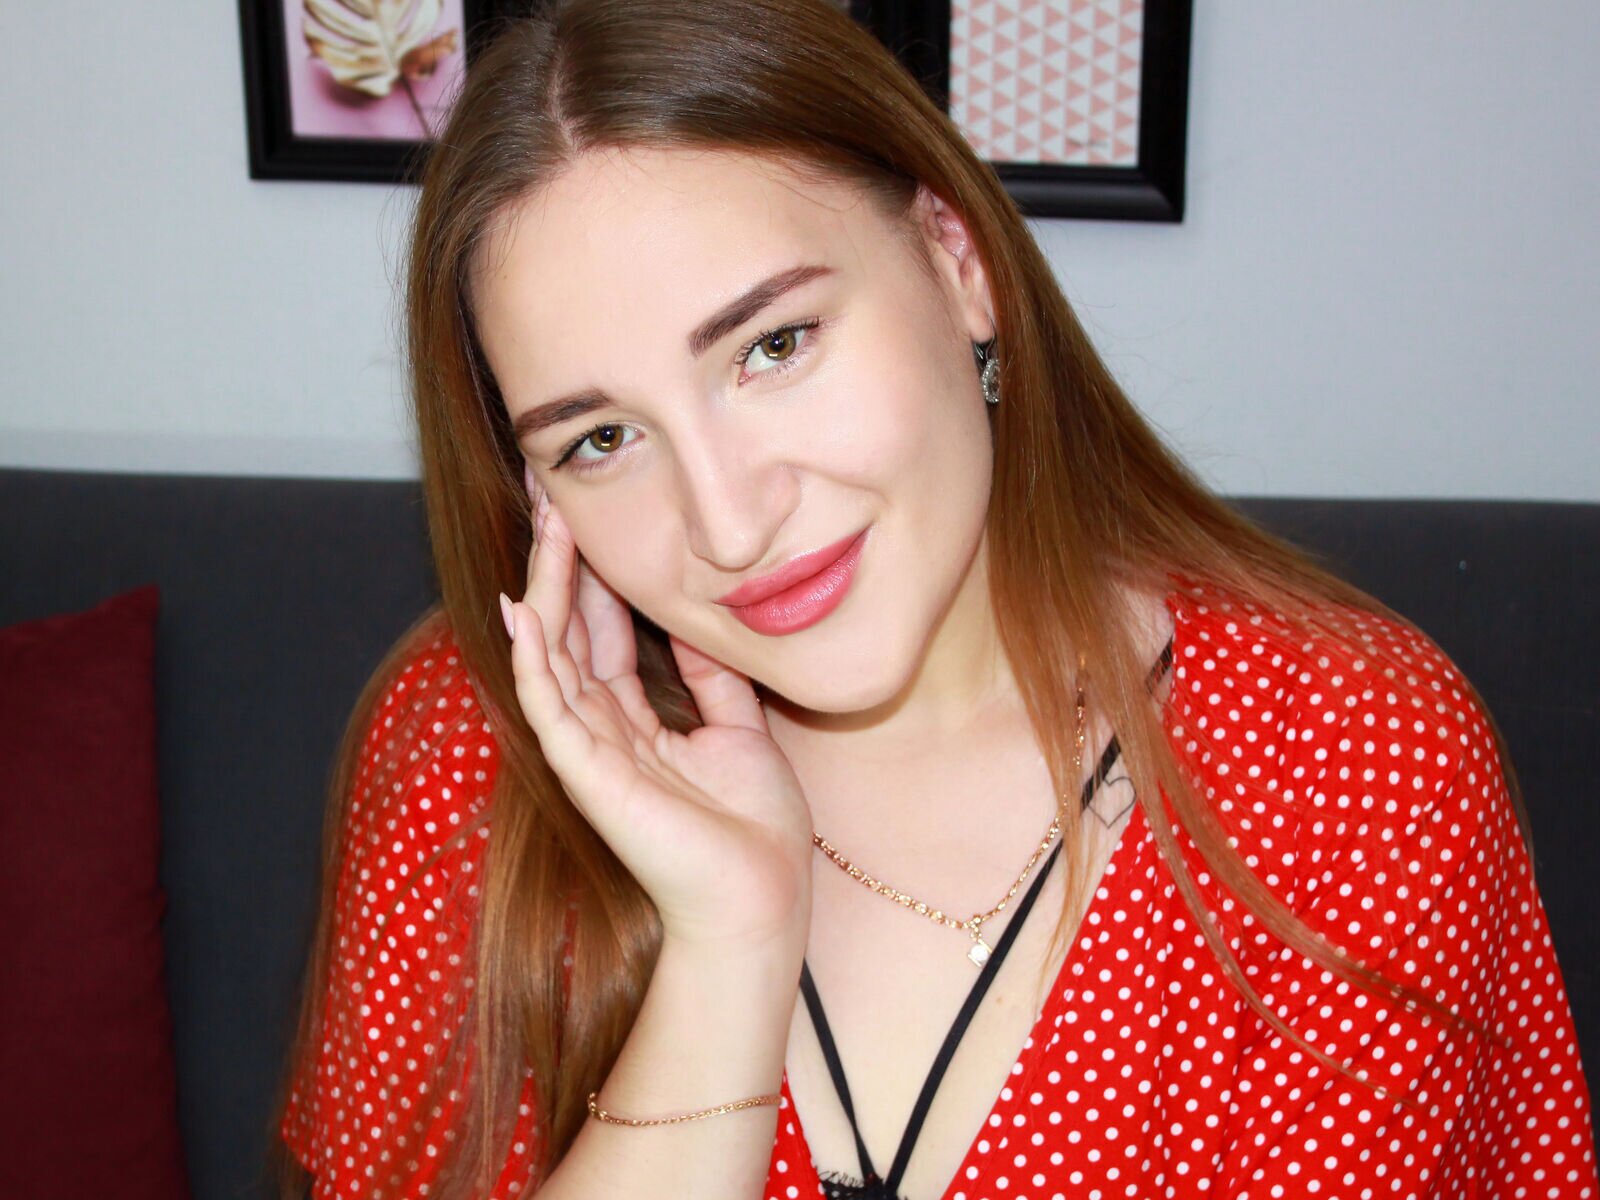 Free Live Sex Chat With IvyParkinson